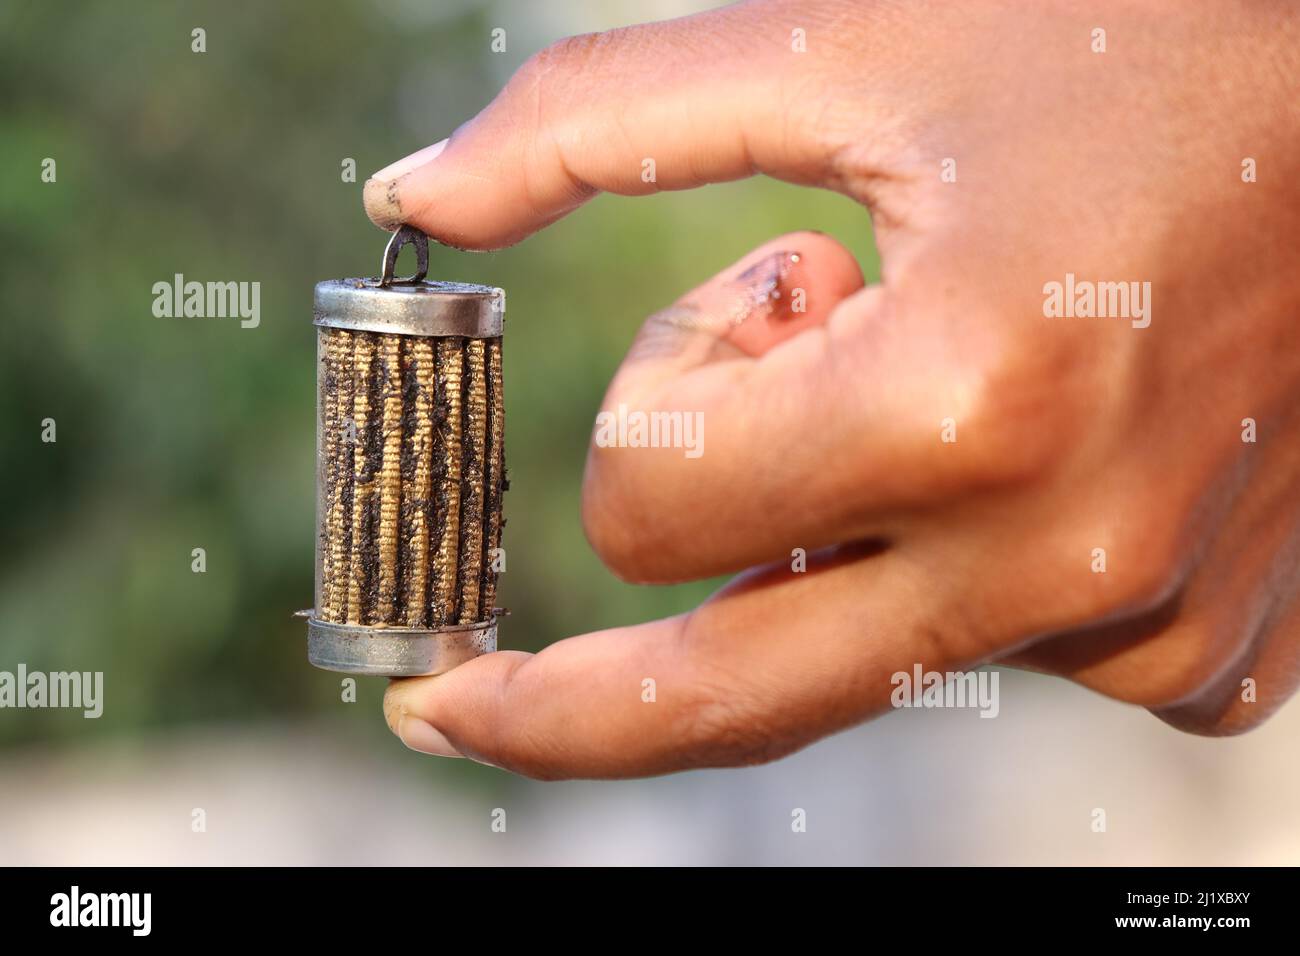 Oil filter with lots of metal pieces struck on its surfaces held in the hand Stock Photo